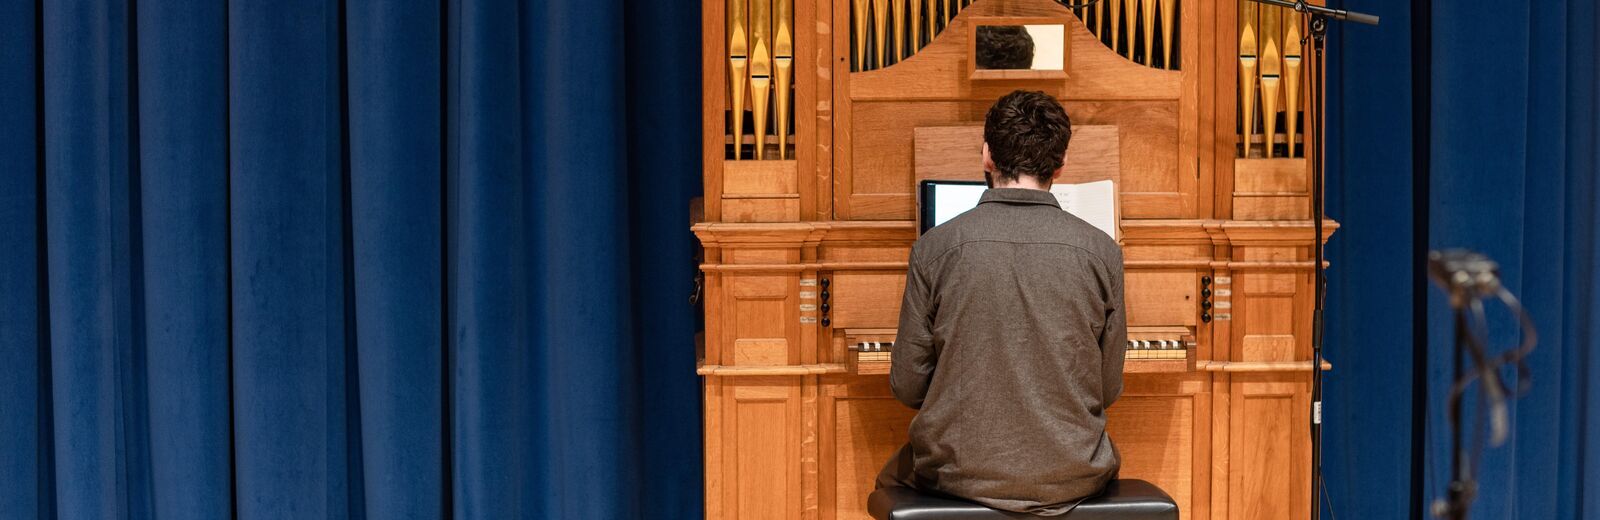 Postgraduate student in the School of Music. They are performing on the organ in the Concert Hall, their back is to the camera. Behind the organ is a royal blue velvet curtain.